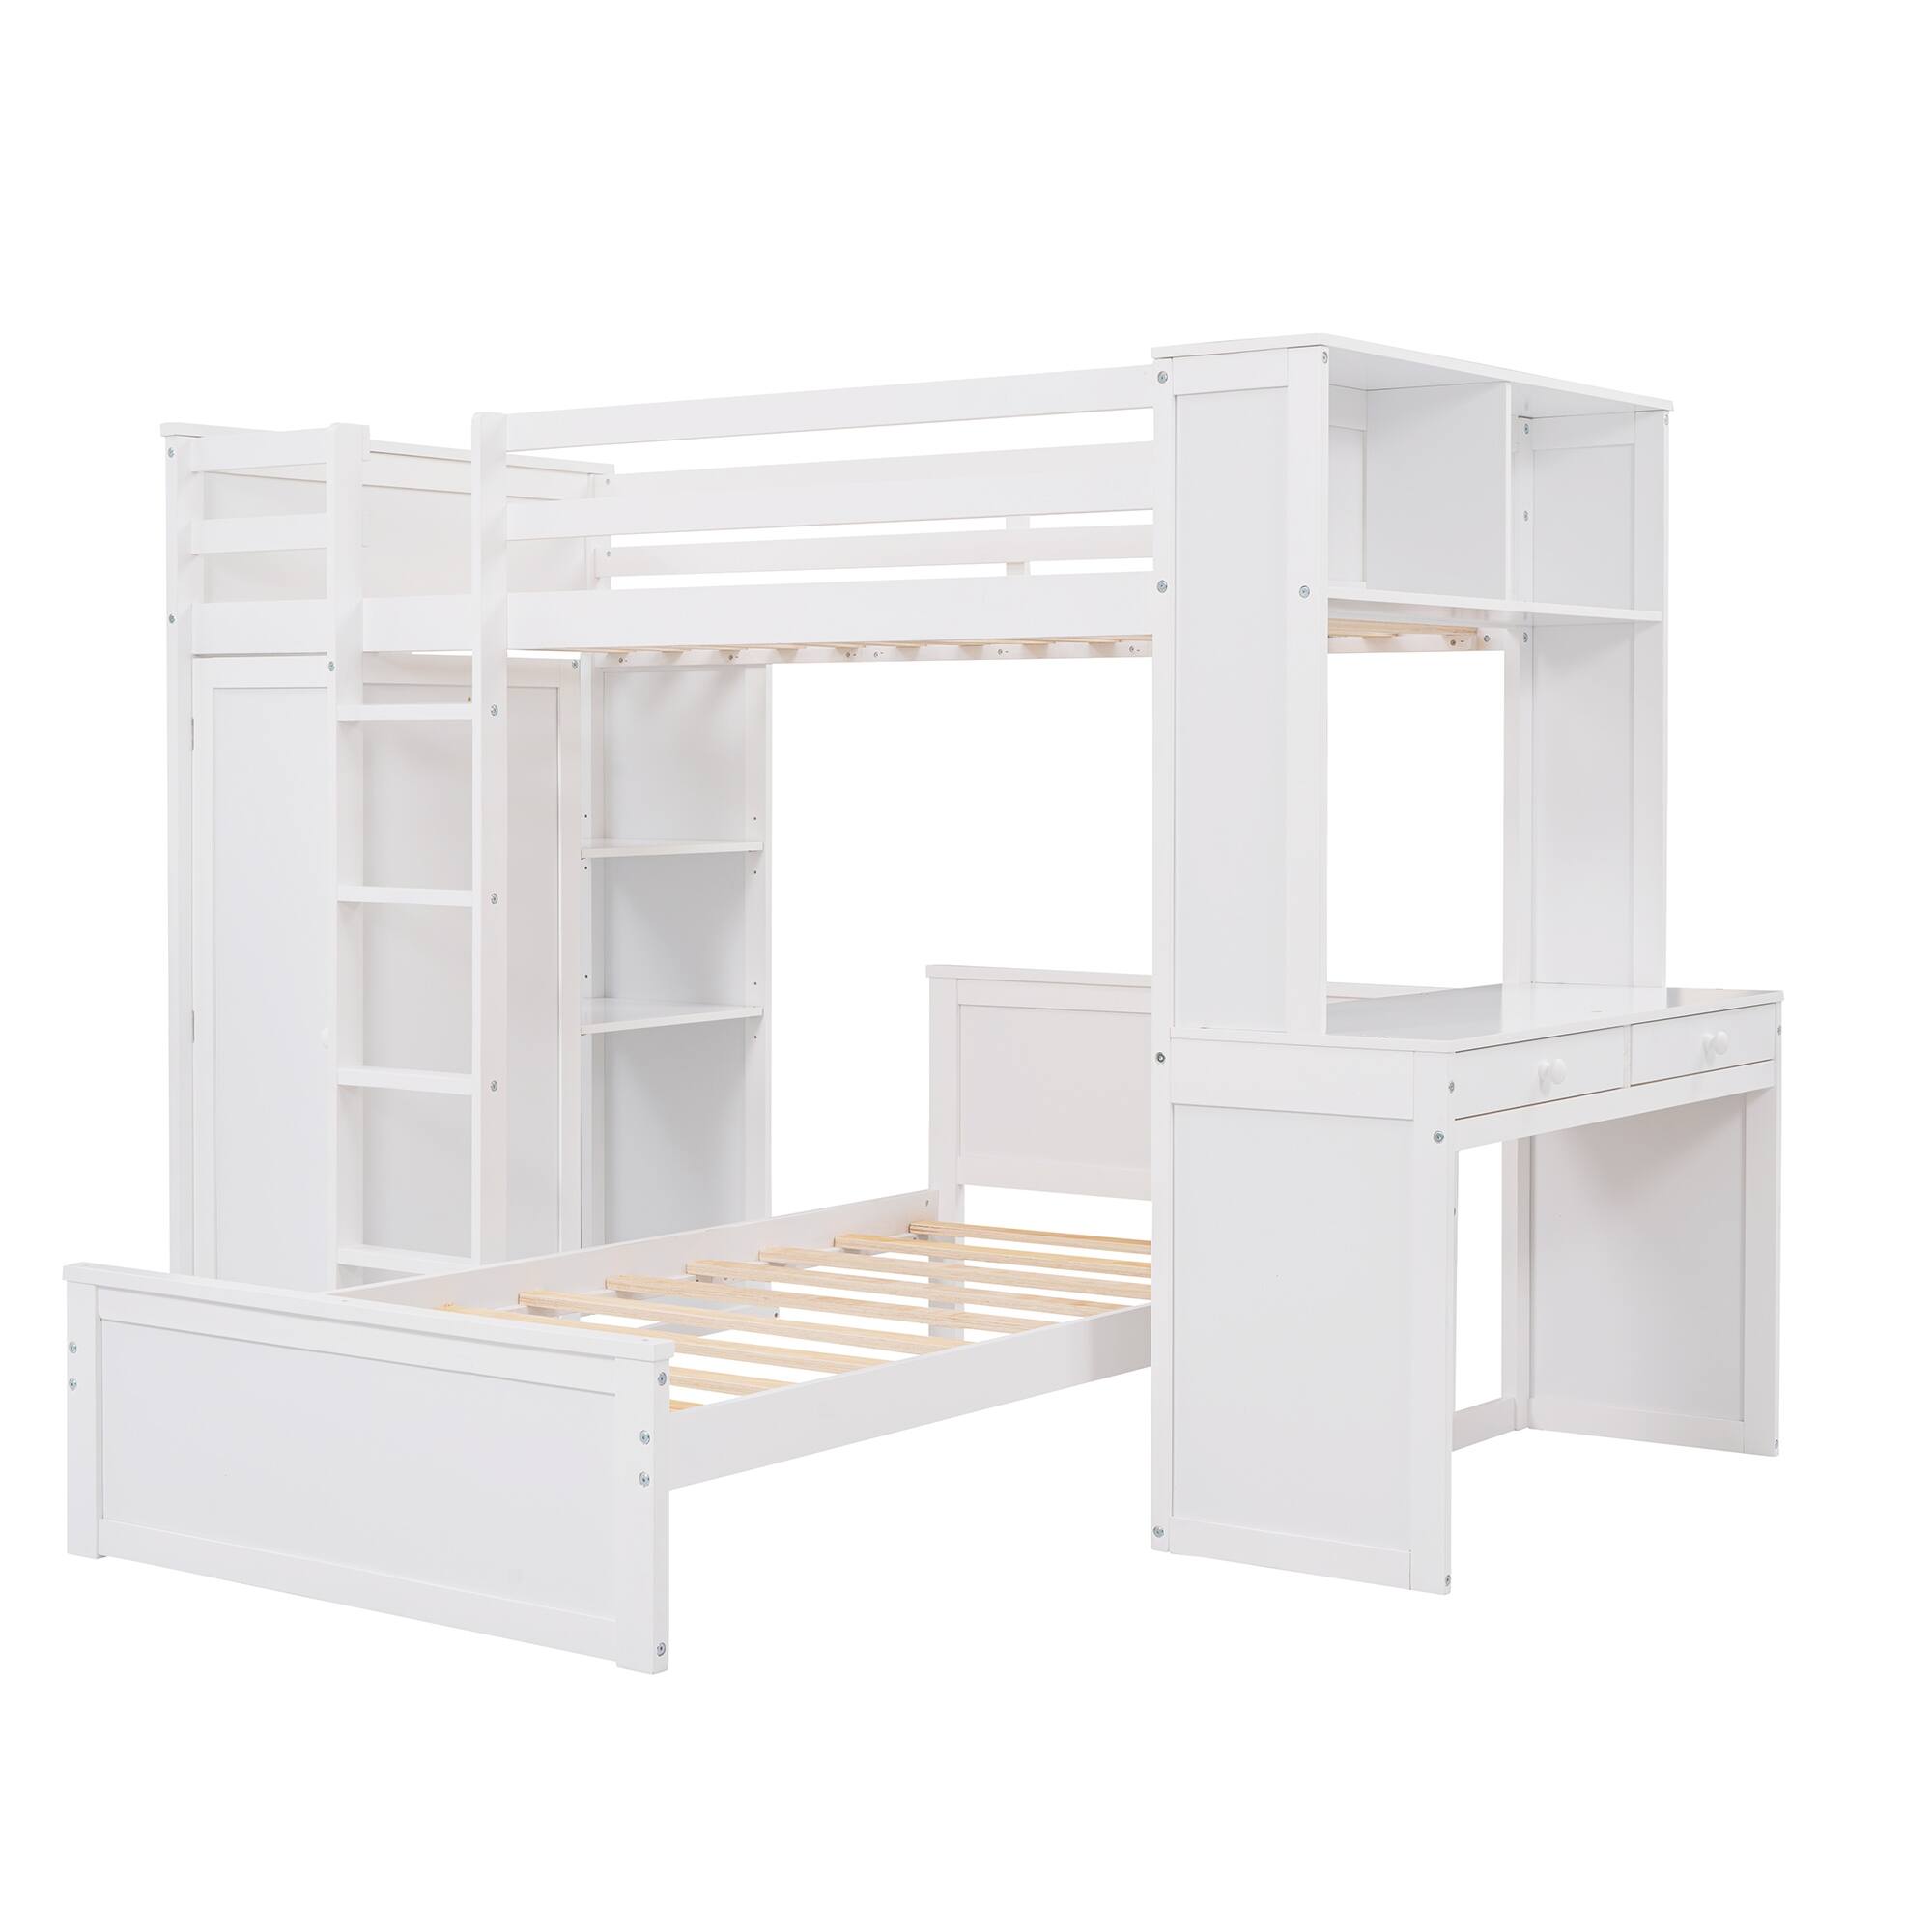 Classic Twin Size Creative Loft Bed w/ a Stand-alone Bed Frame, Shelves ...